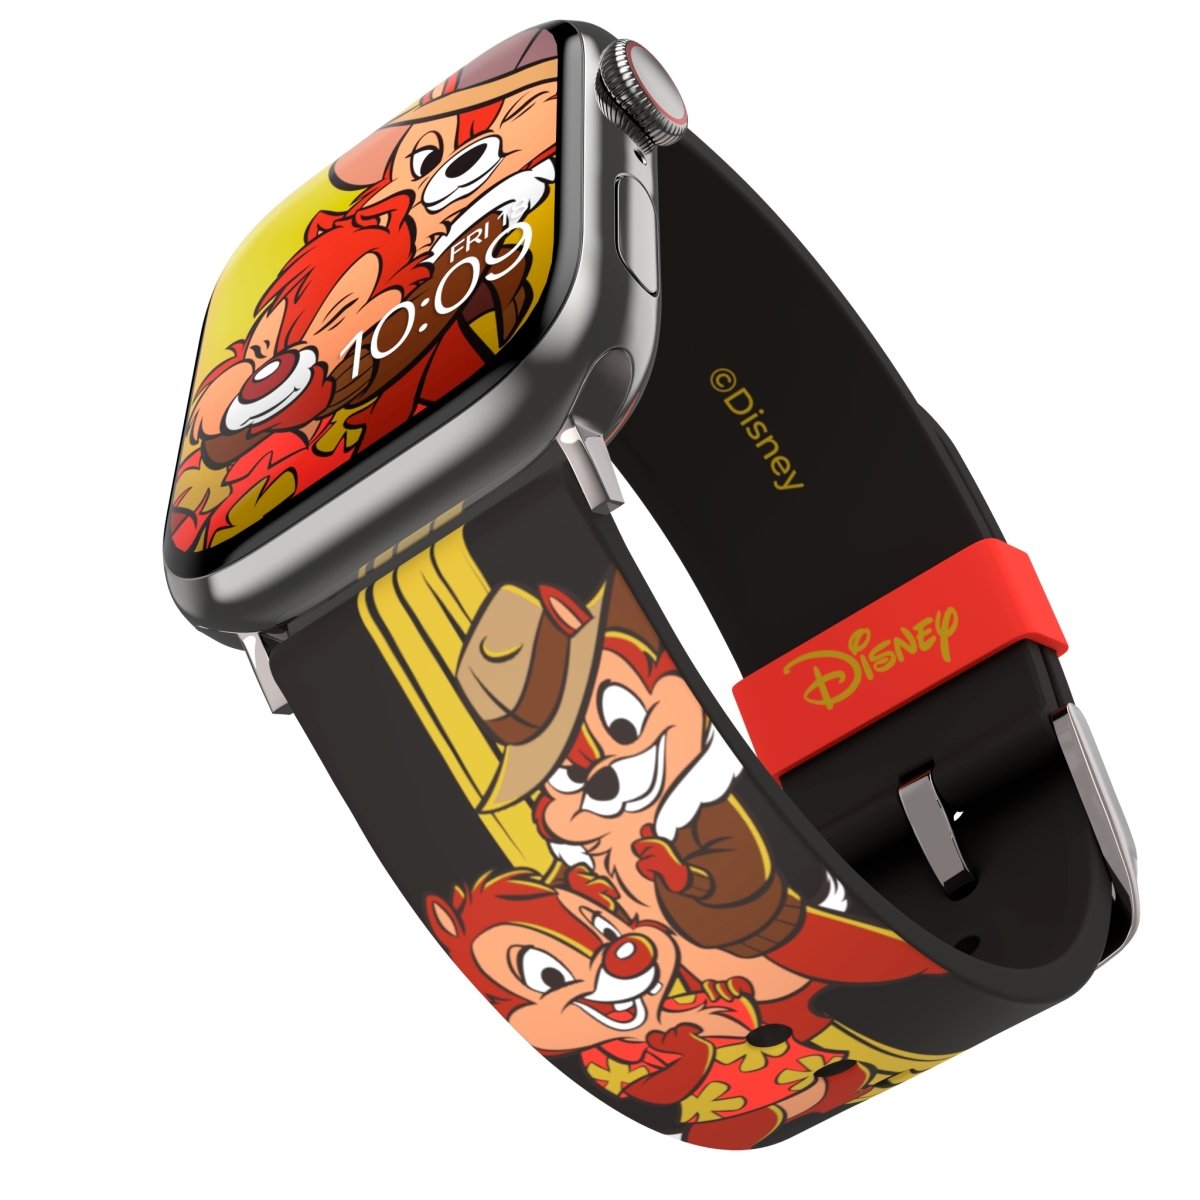 Chip ’n Dale - Rescue Rangers Smartwatch Band by MobyFox